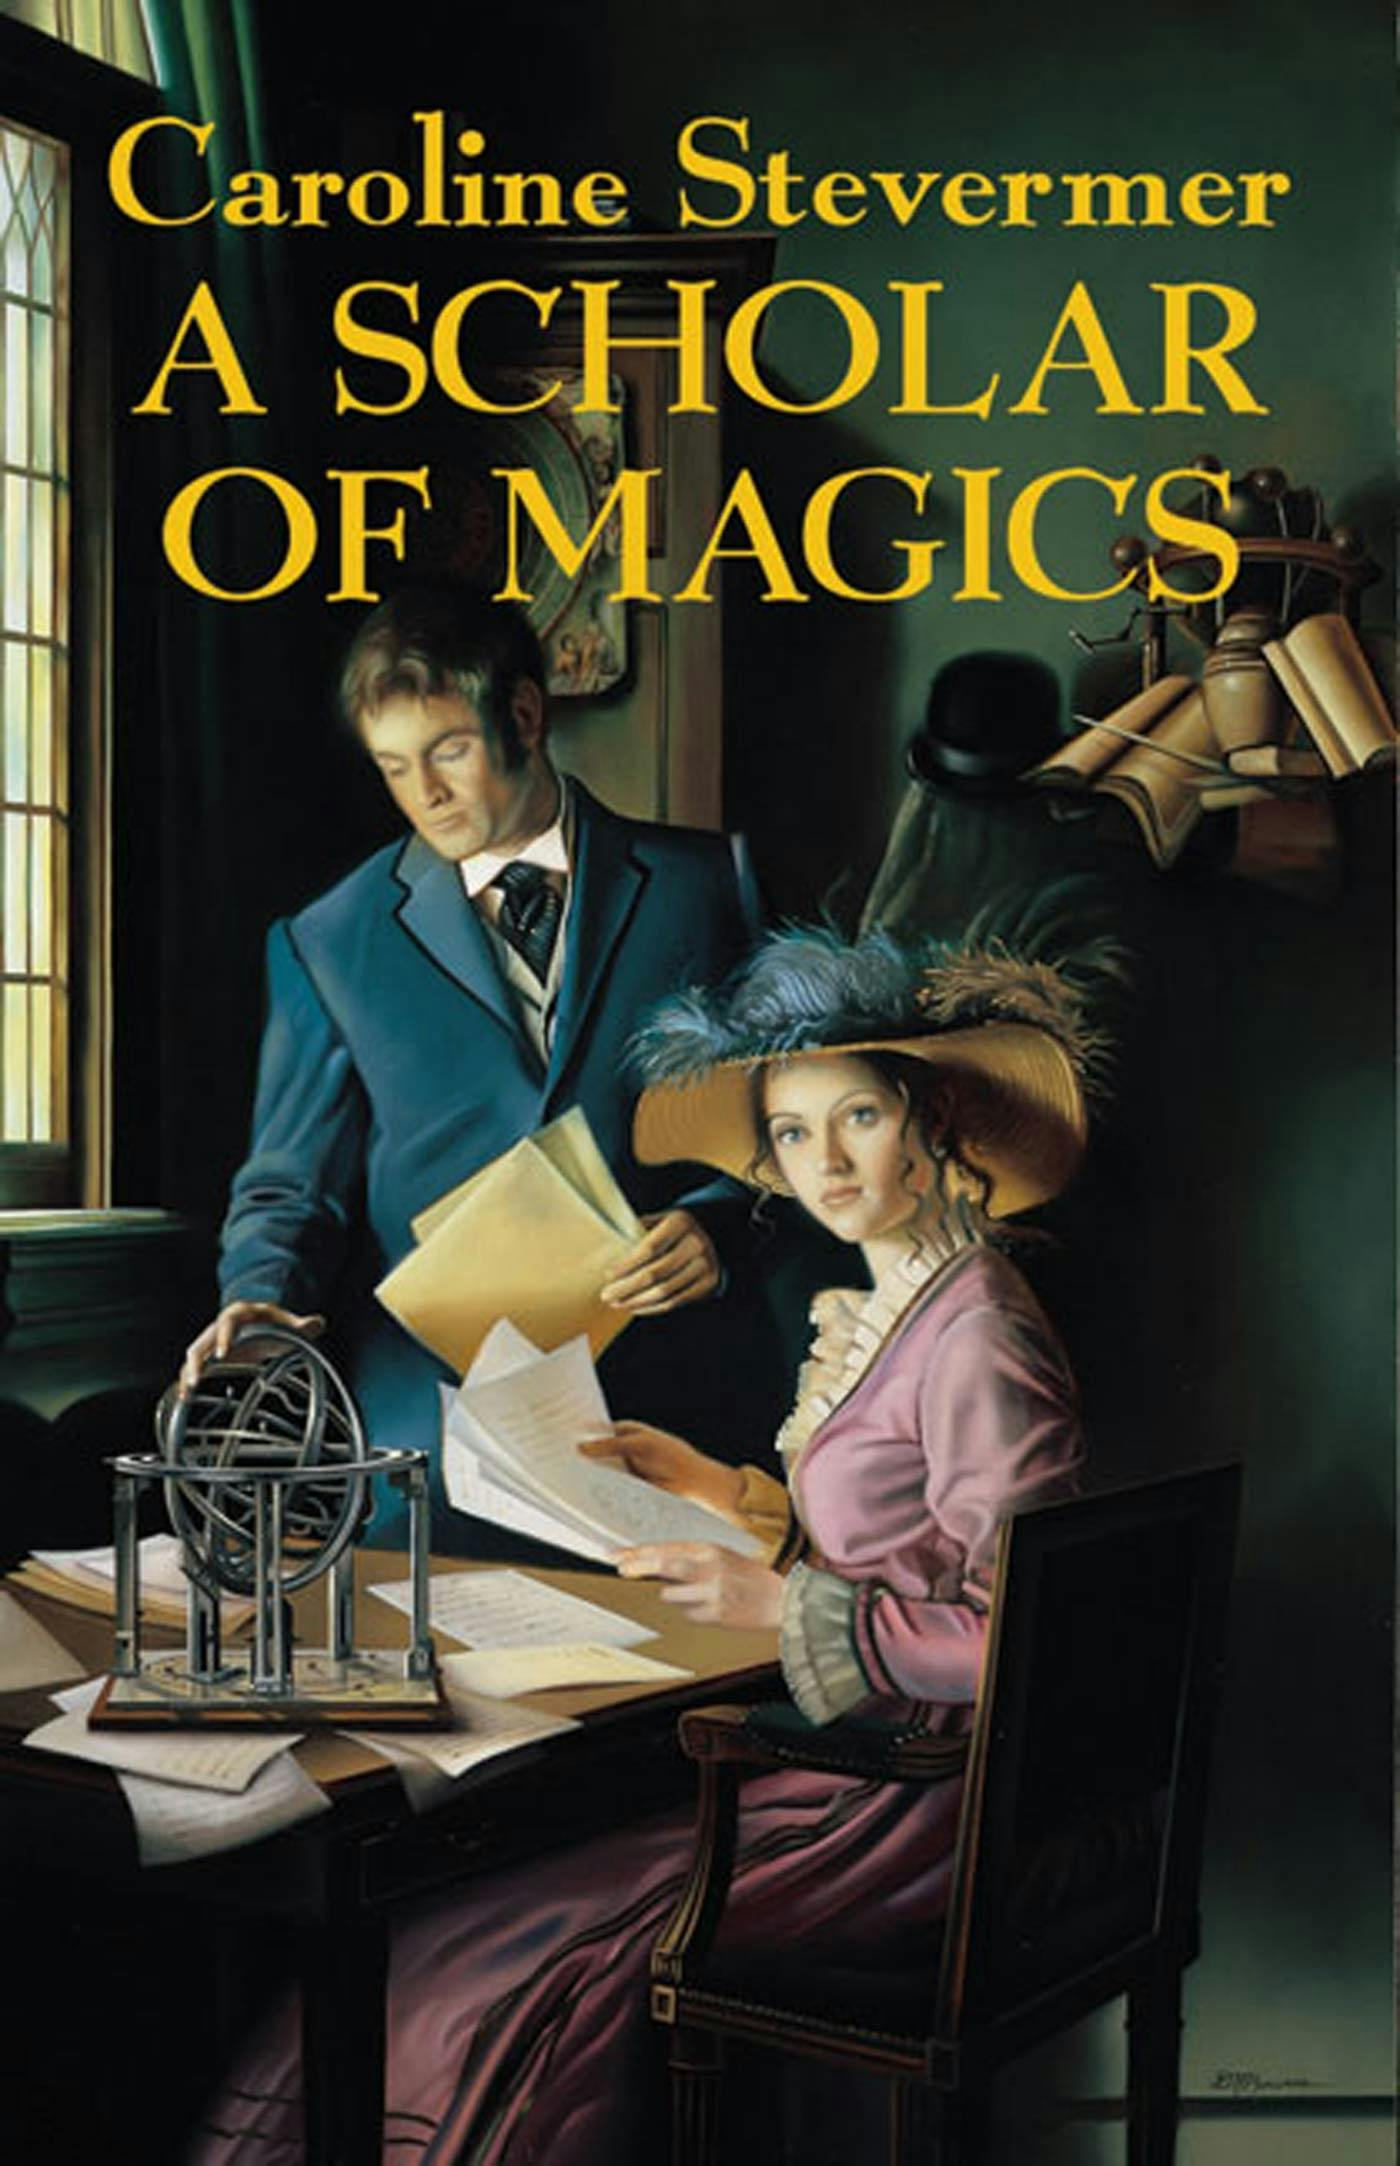 Cover for the book titled as: A Scholar of Magics